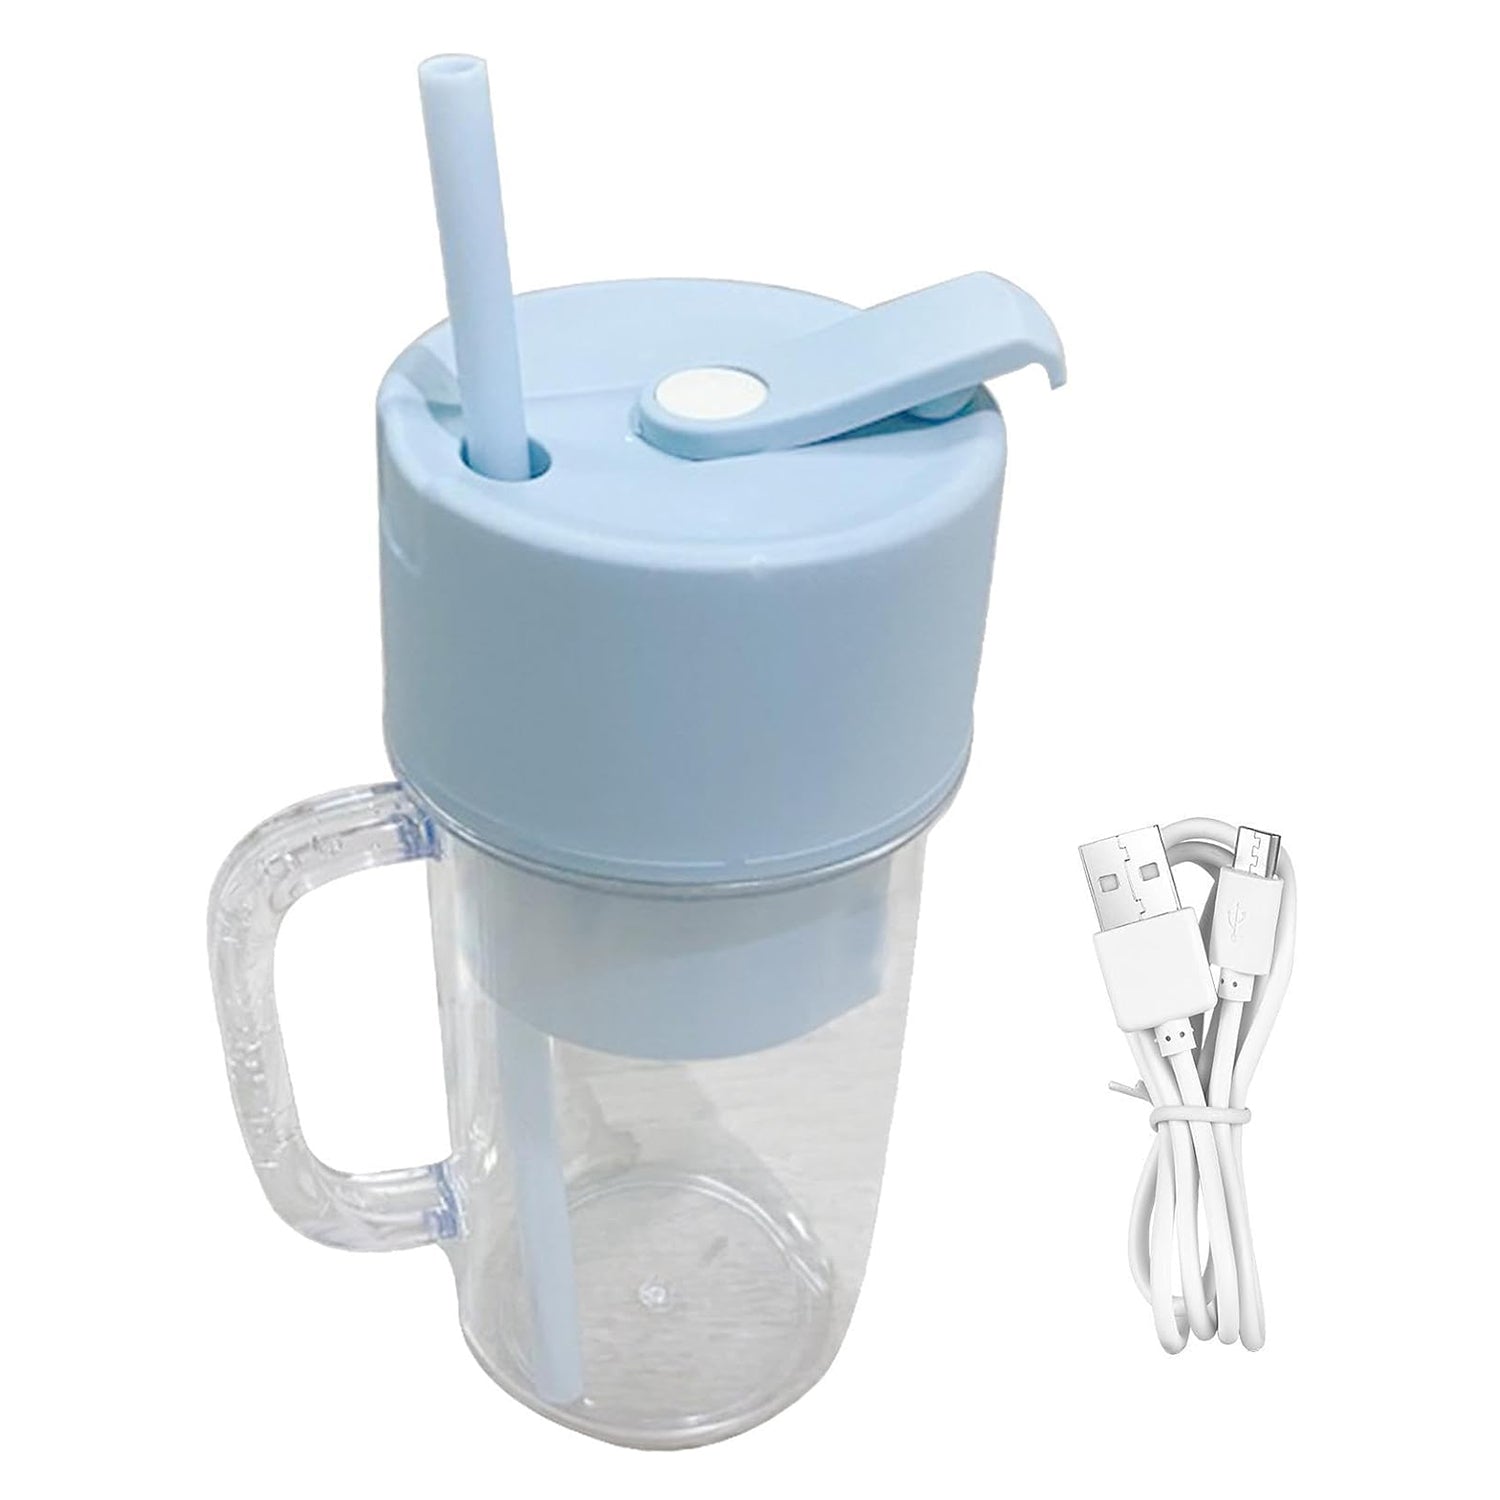 5841 2 In1 Portable Crusher Juicer With Handle & Straw for Smoothie Sipper USB Rechargeable (340 ml) 6 Stainless Steel Blades Compact Juicer Mixer, Juicer Portable Fresh Juice Blender Portable Electric Juicer ( 340 ML )